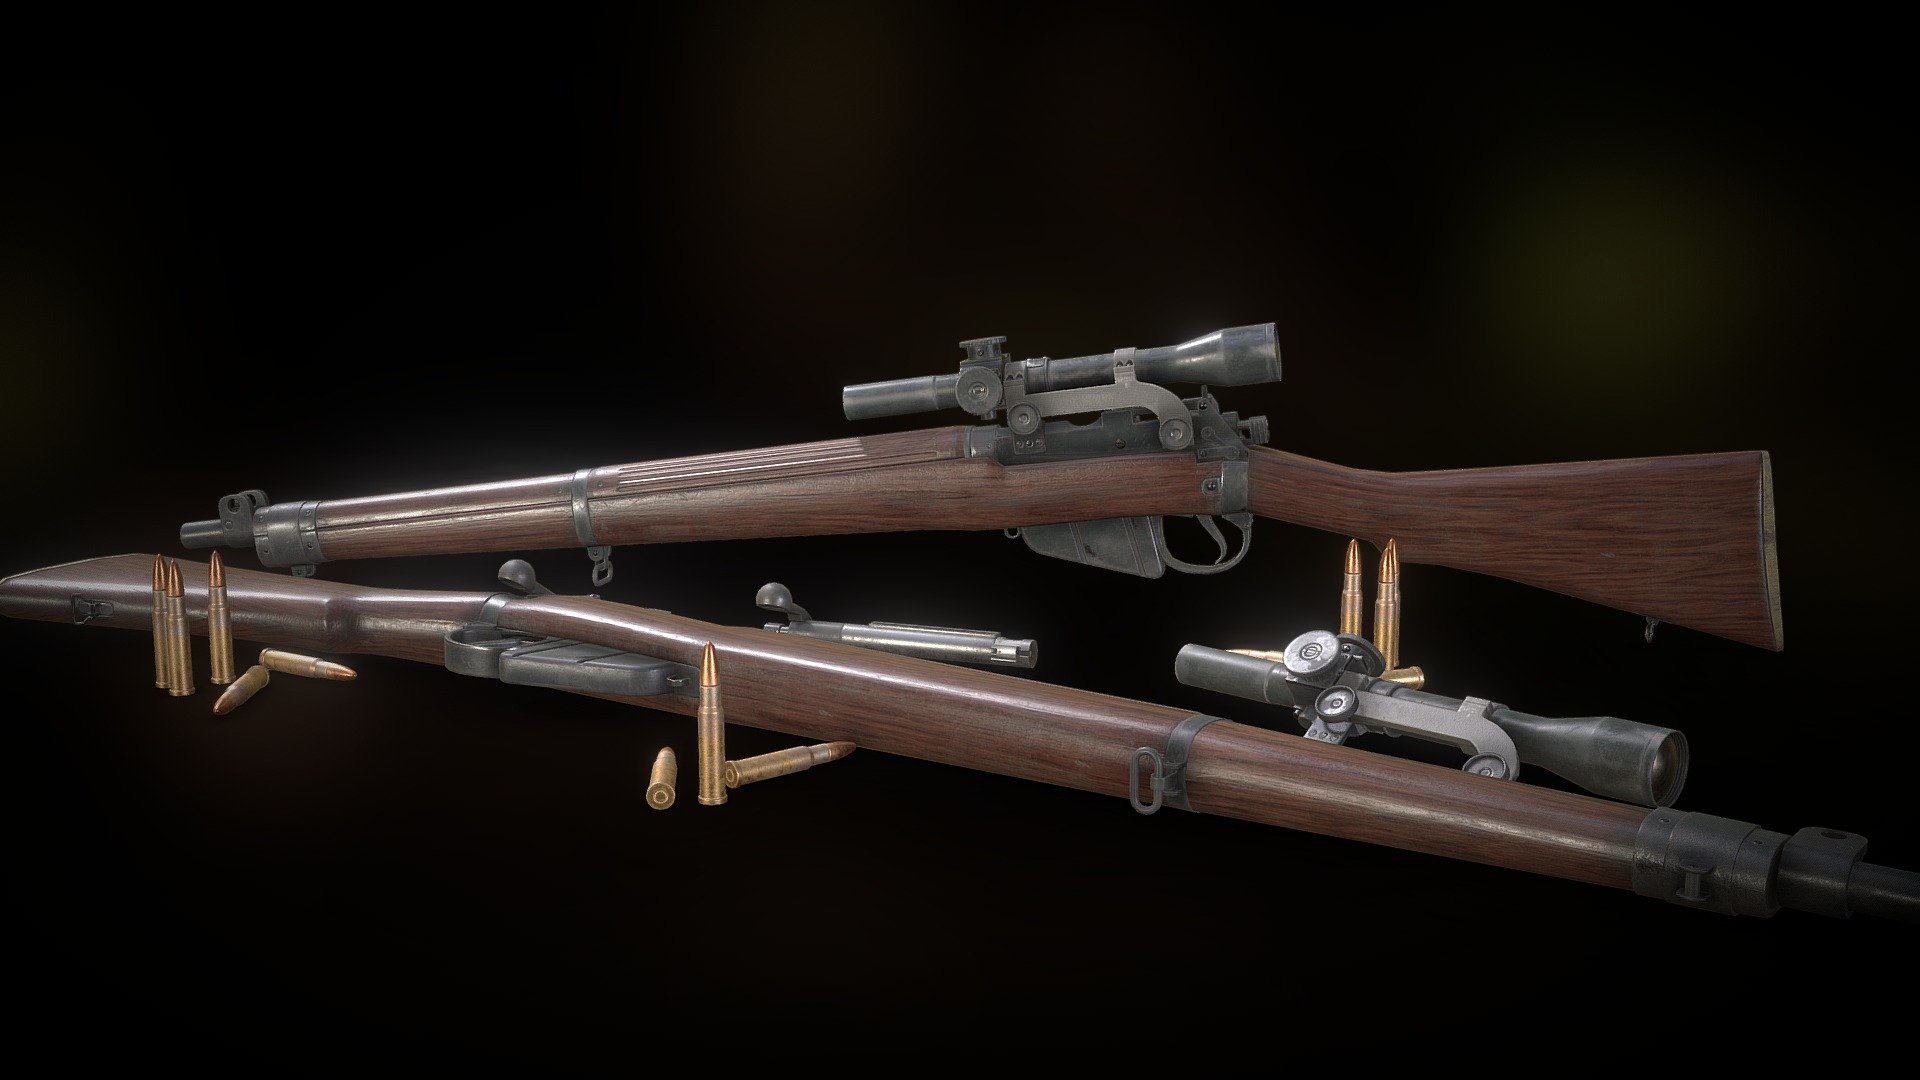 SMLE or short, magazine lee-enfield rifle is bolt action rifle that commonly use during World War 2 by british empire. This game model are purposed for First Person game but suitable for third person game and other.

Model information :




available format : FBX, obj , and blend

Blend format already rigged

FBX and obj already in separated part for rigging

rifle (6,90cm X 108cm x 20,80cm) (4117 verts, 7435 Tris)

scope (5,62cm X 28,6cm x 8,38cm) (1872 verts, 3228 Tris)

texture size: rifle(4096x4096), scope(2048x2948)

Overlapping/mirror UV in back stock, trigger, and some part

pbr base(metal), cryengine, unreal engine, and unity texture in texture file /folder

TIP :
The model may appear more shiny in some render engine, tweak the roughness map for fix it. For best result (like in the image) set roughness to noncolourdata /uncheck Srgb in your render engine or increase the roughness by multiply it by 1,5 to 2 - SMLE-MK4 / Lee-Enfield no.4 rifle - Buy Royalty Free 3D model by Michael Karel (@michaelkarel) 3d model